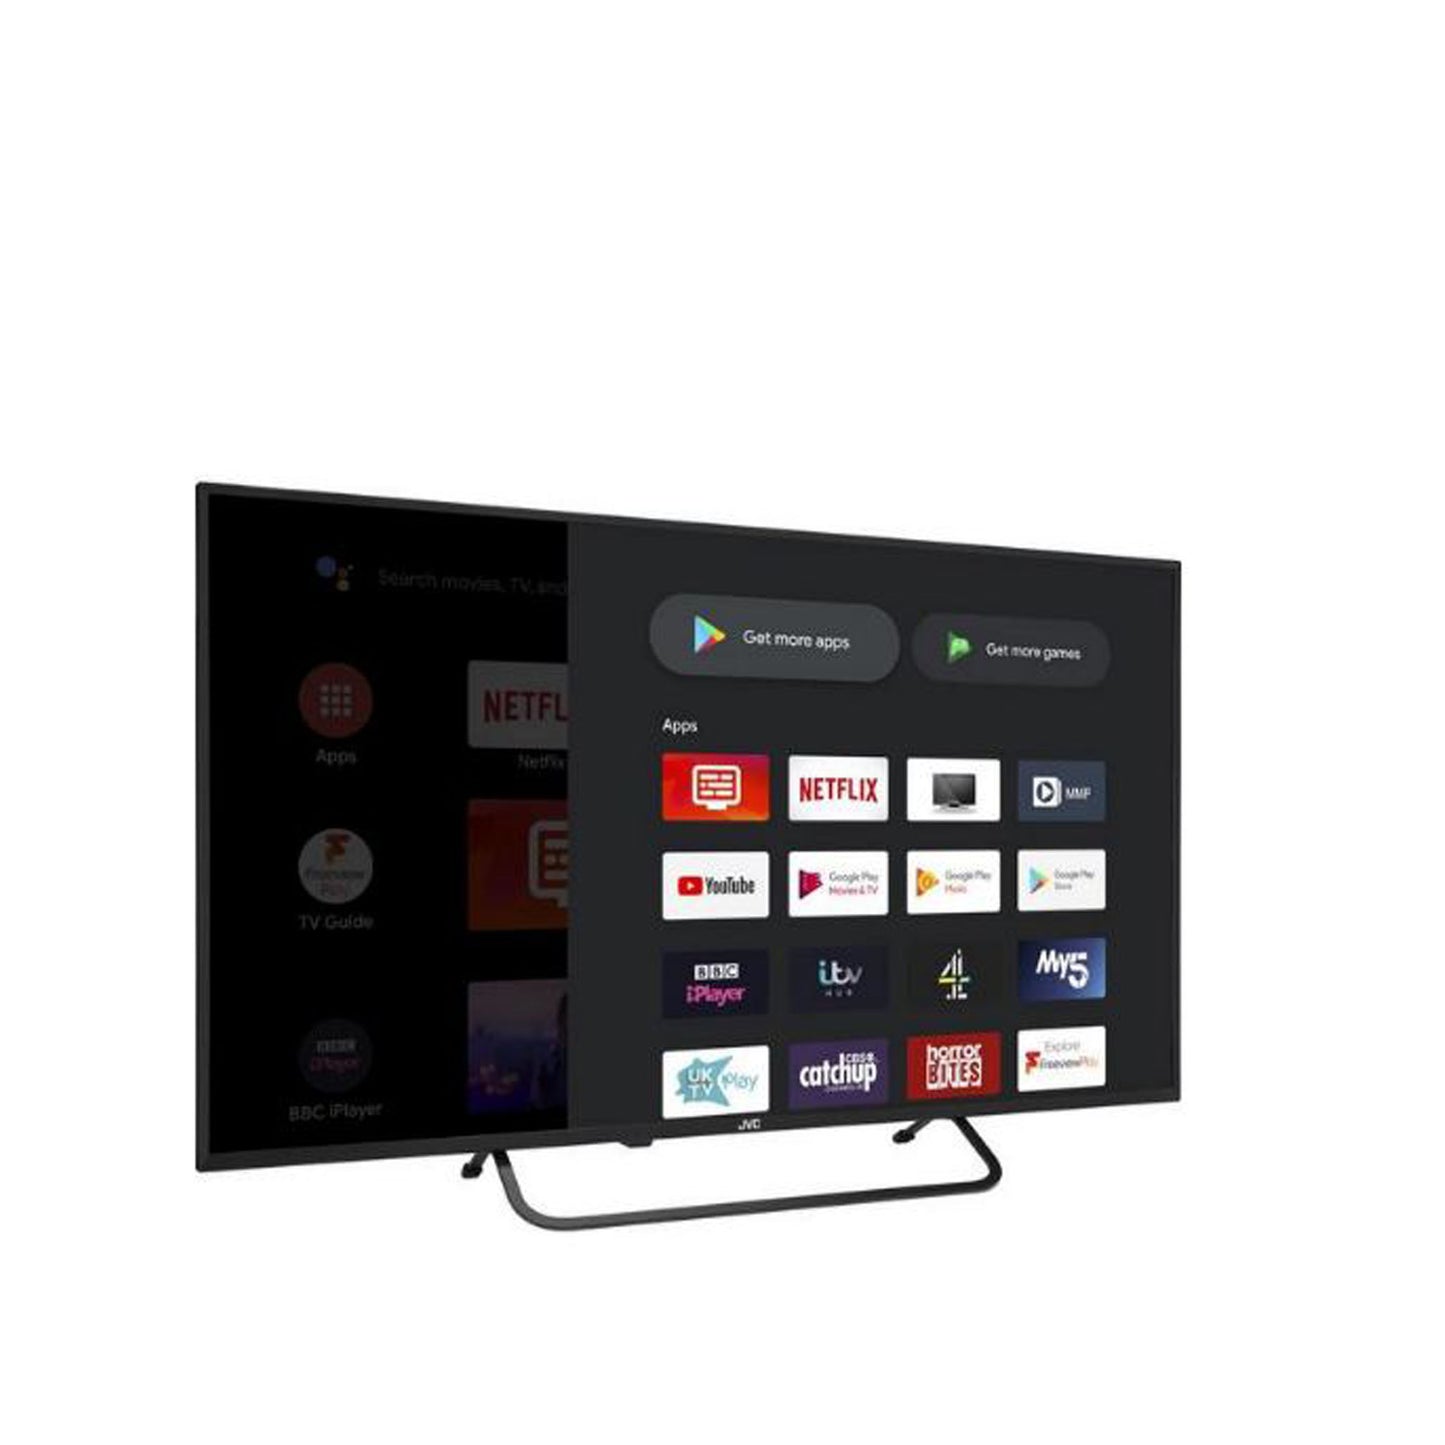 JVC LT-40CA790 Android TV 40" Smart Full HD LED TV with Google Assistant